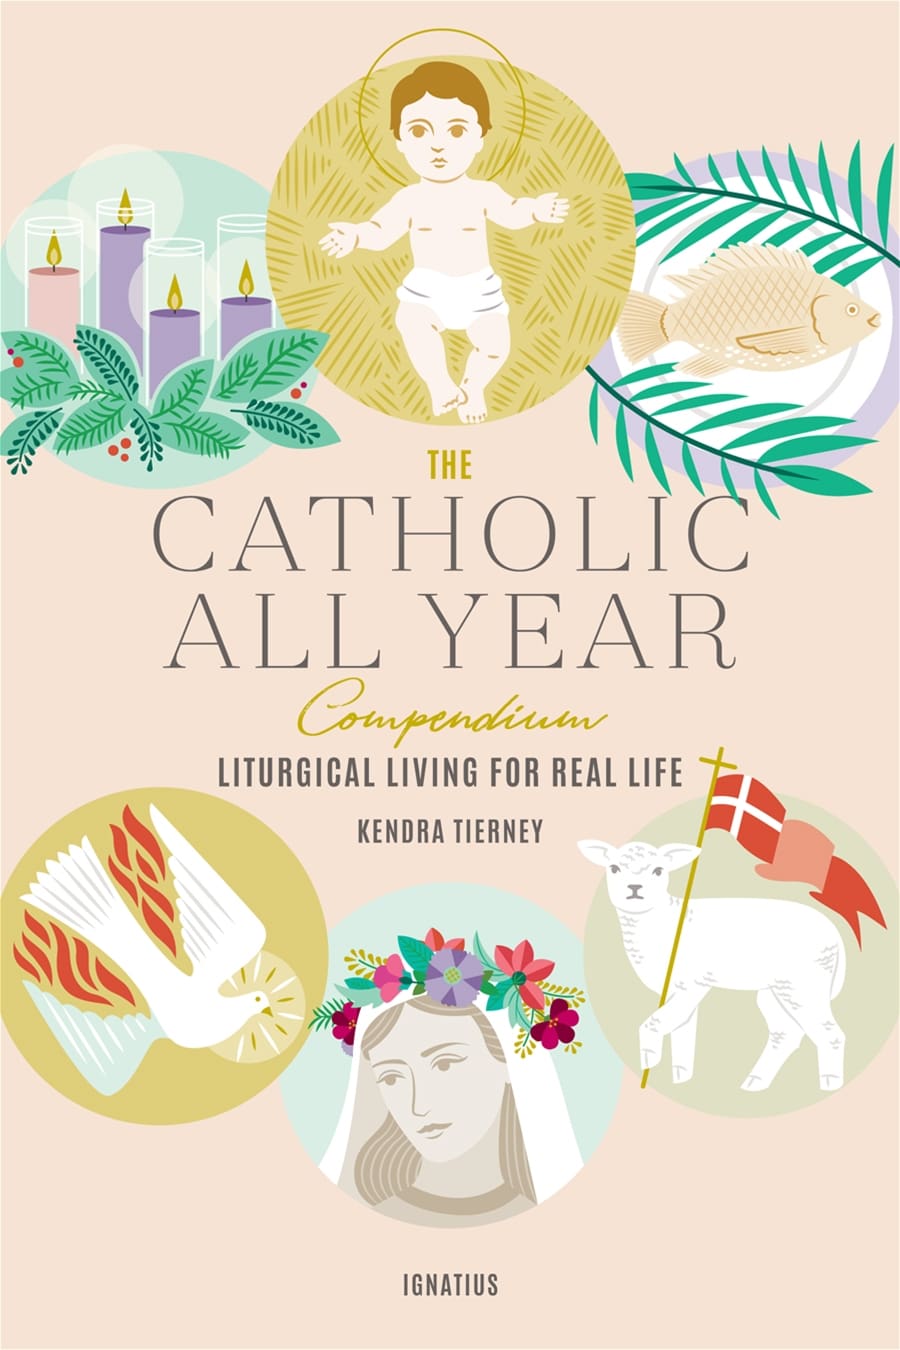 Book Explores a Year of Living Liturgically